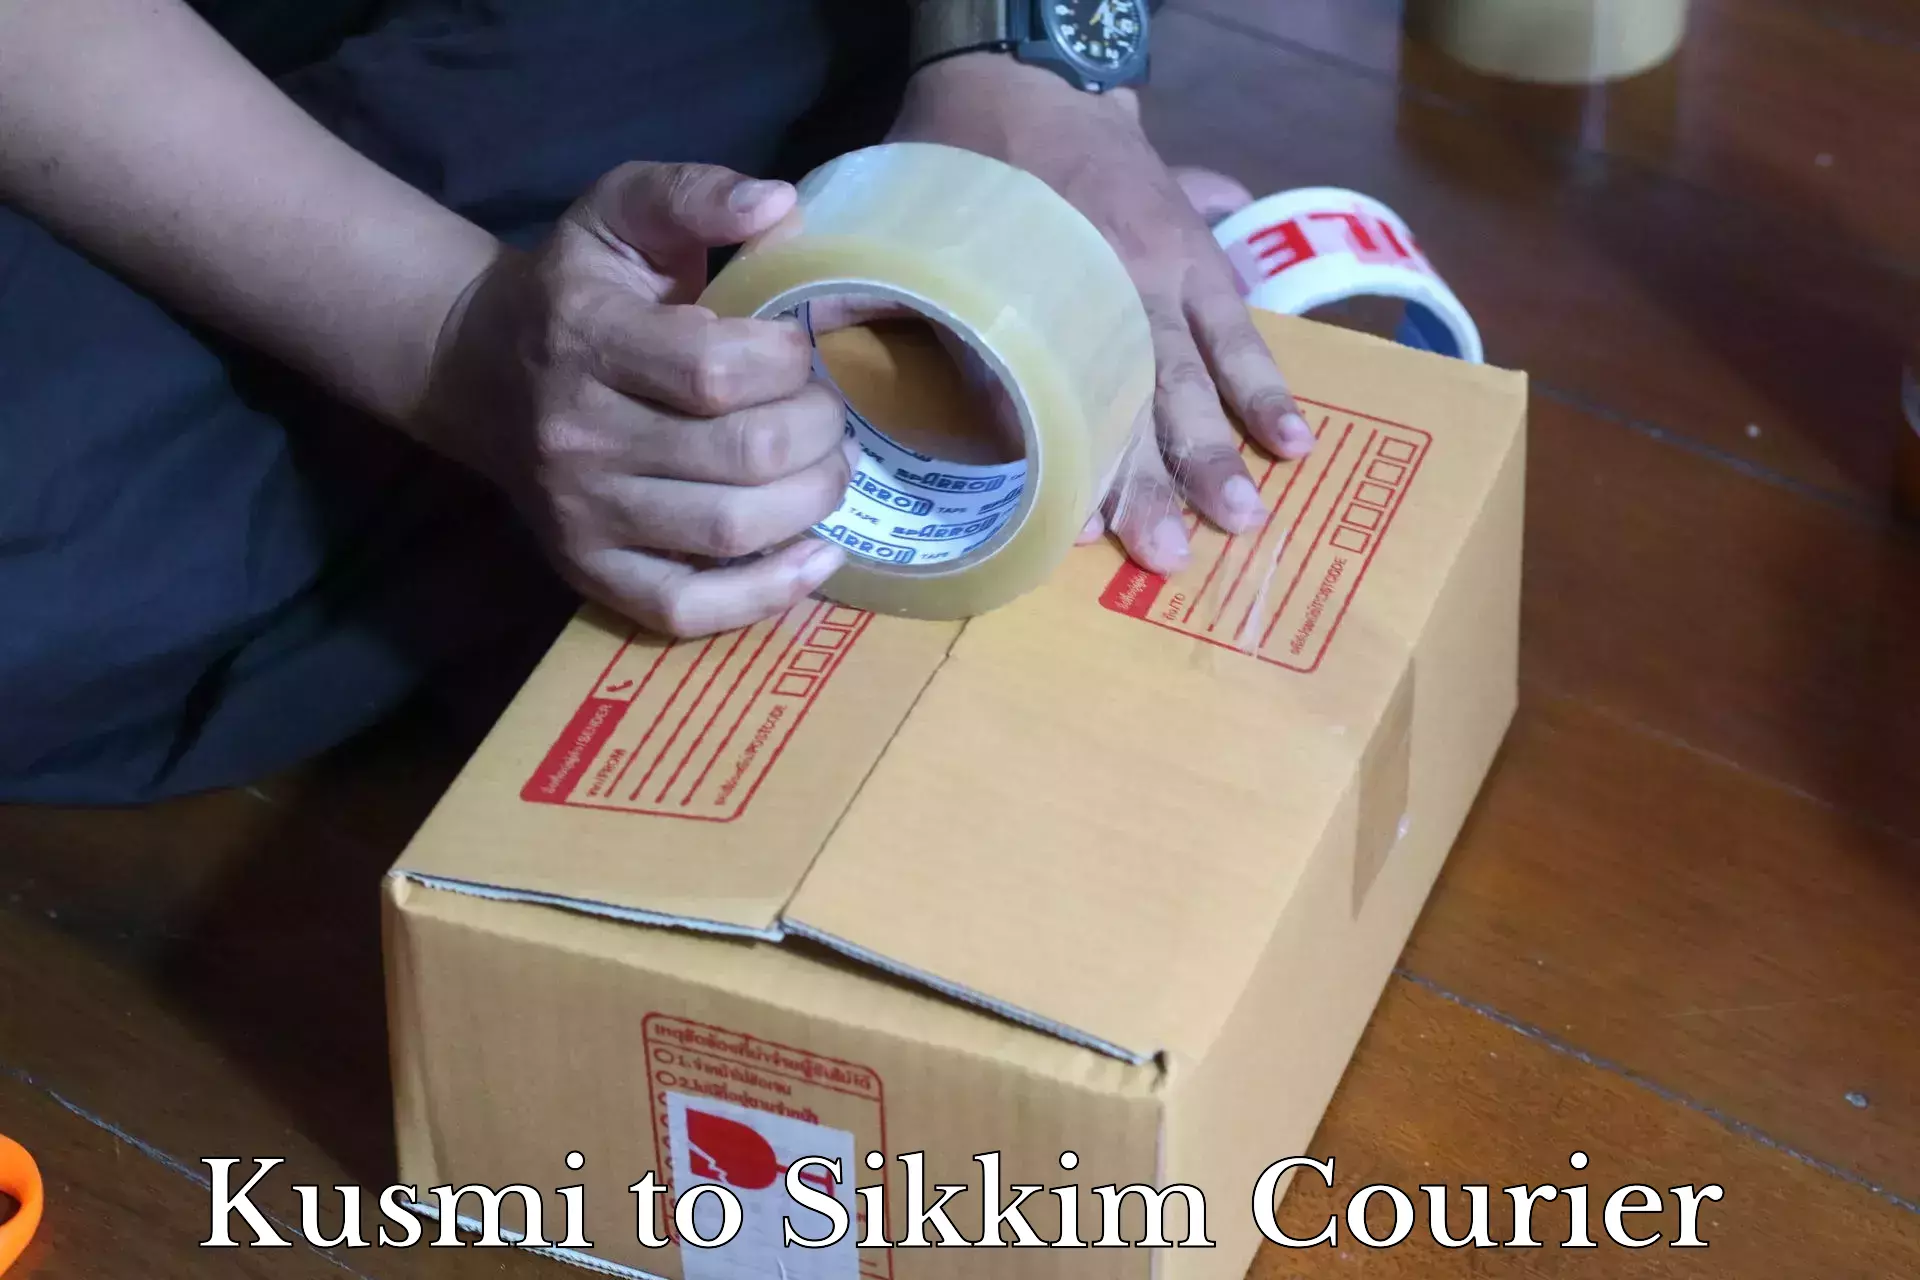 Courier service efficiency Kusmi to Pelling